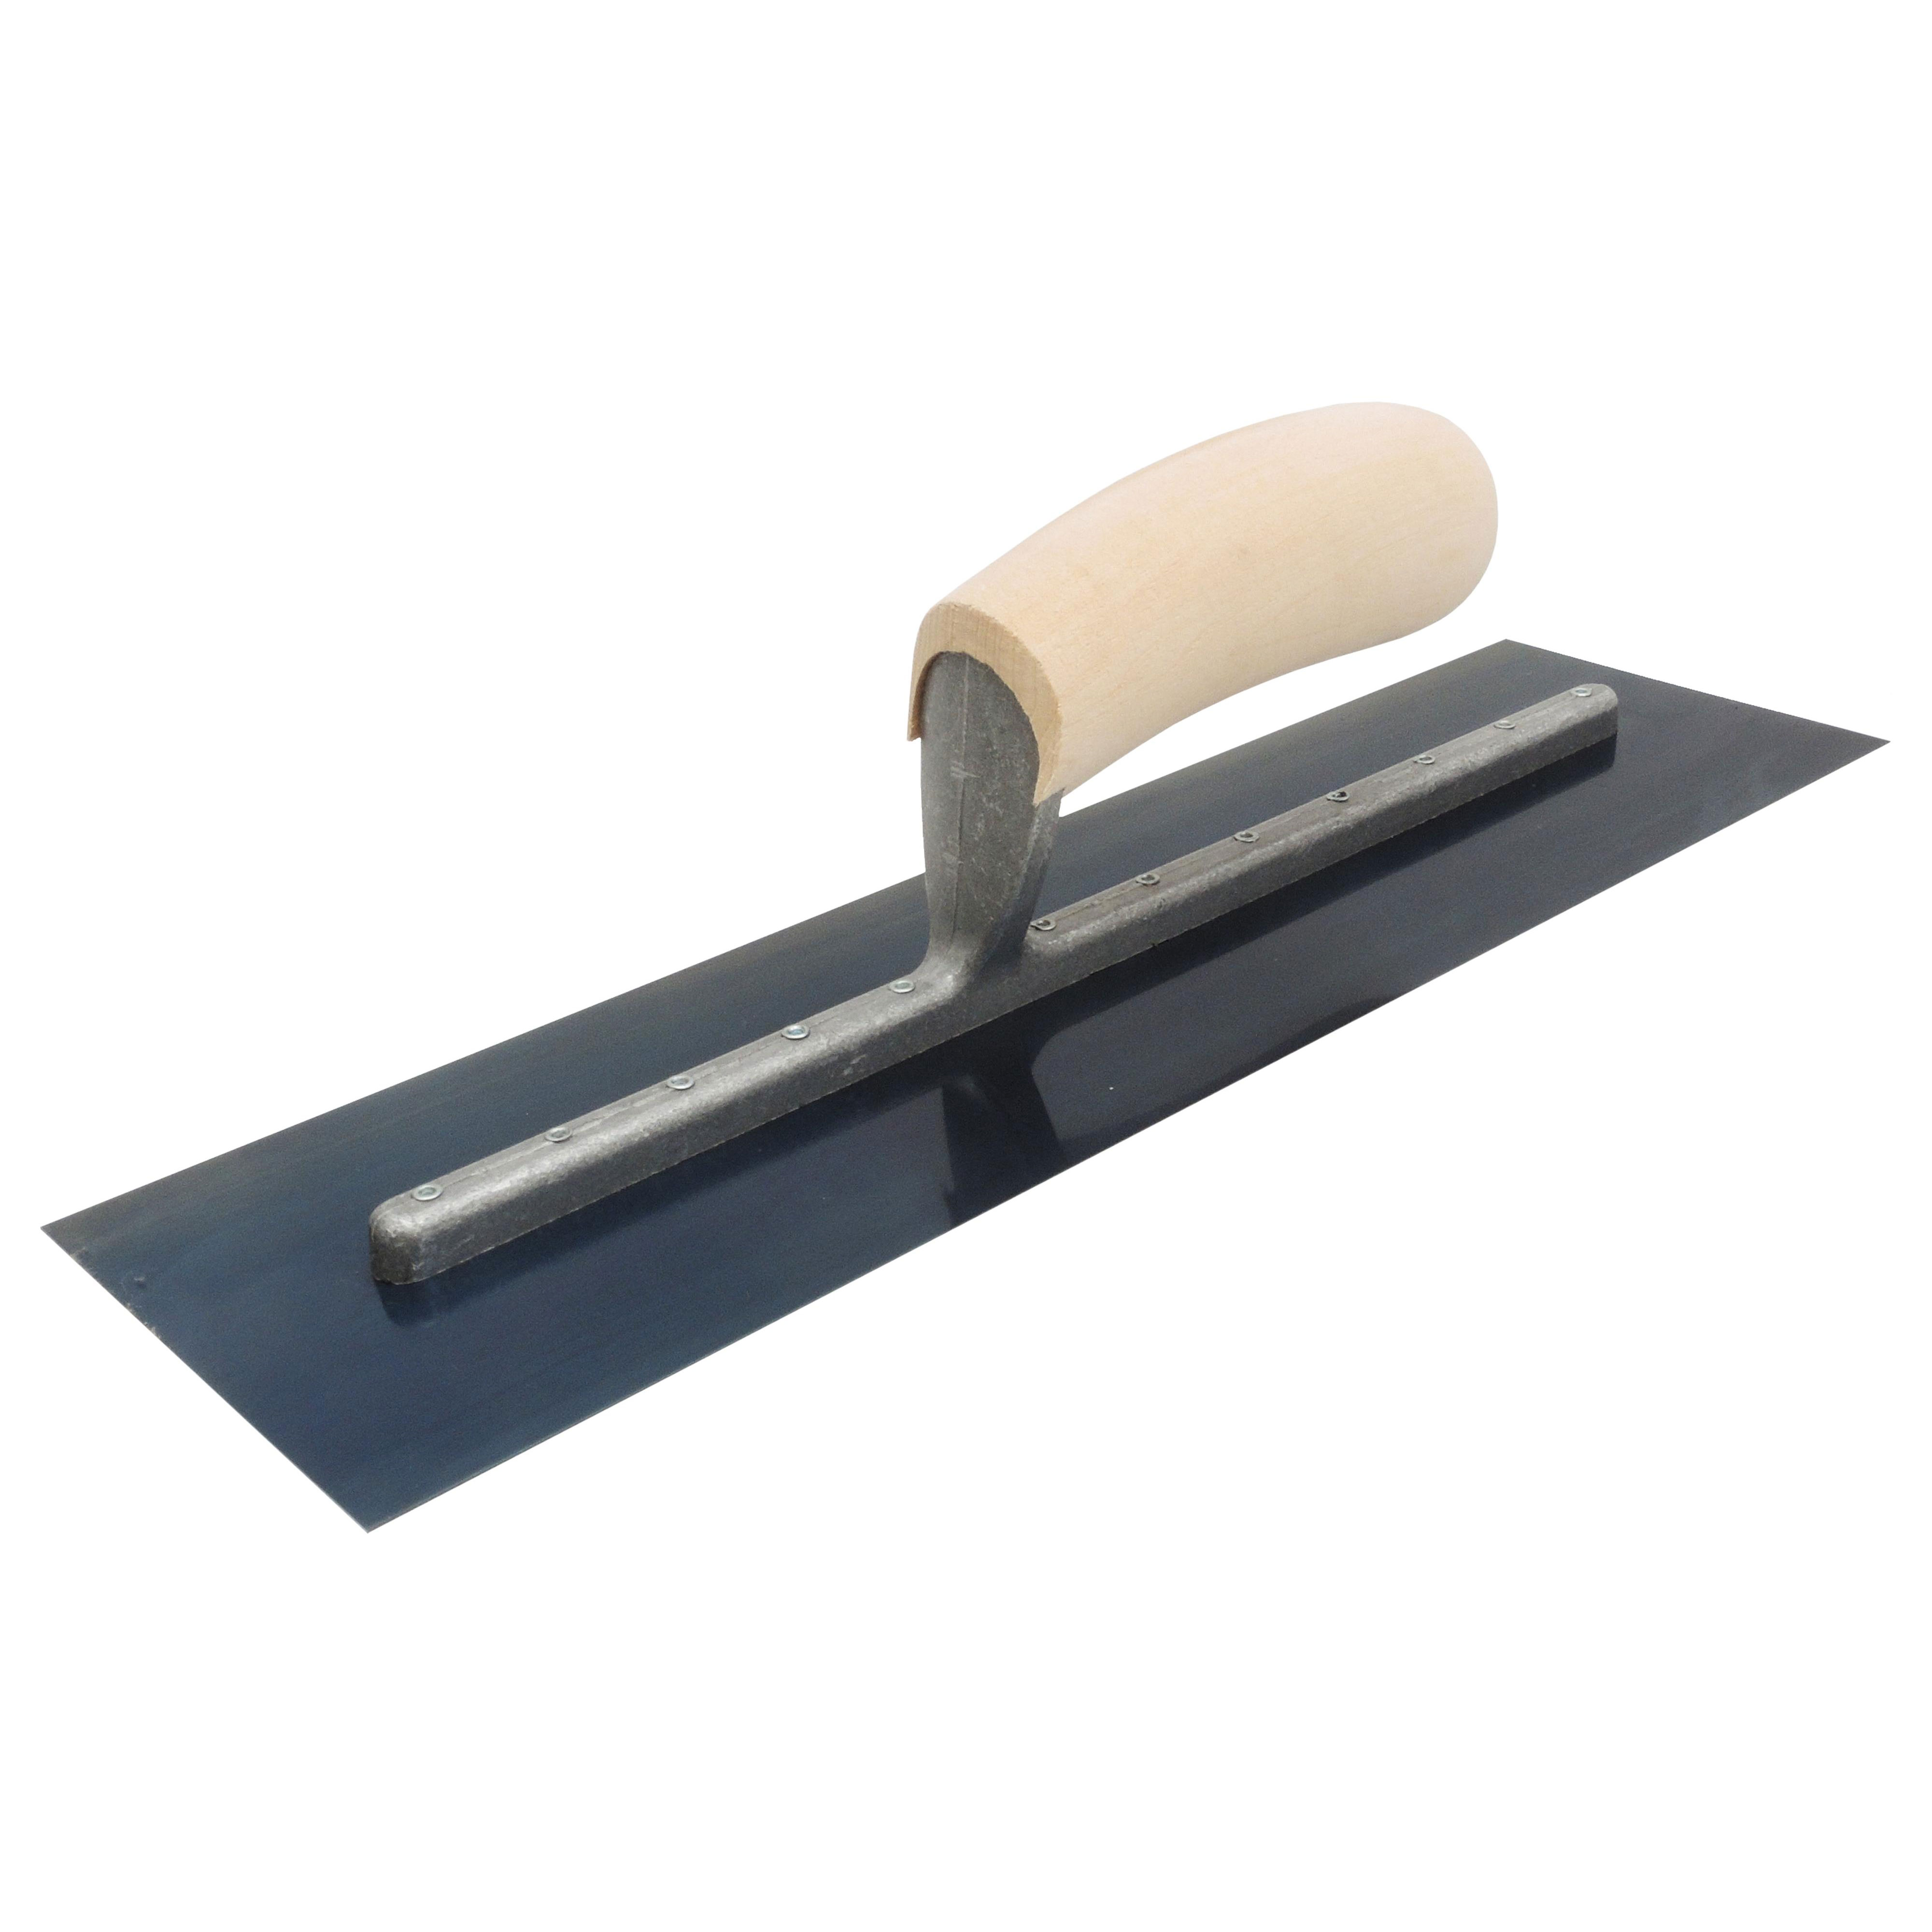 Marshalltown FT124B 12in x 4in Blue Steel Finishing Trowel with Wood Handle FT124B